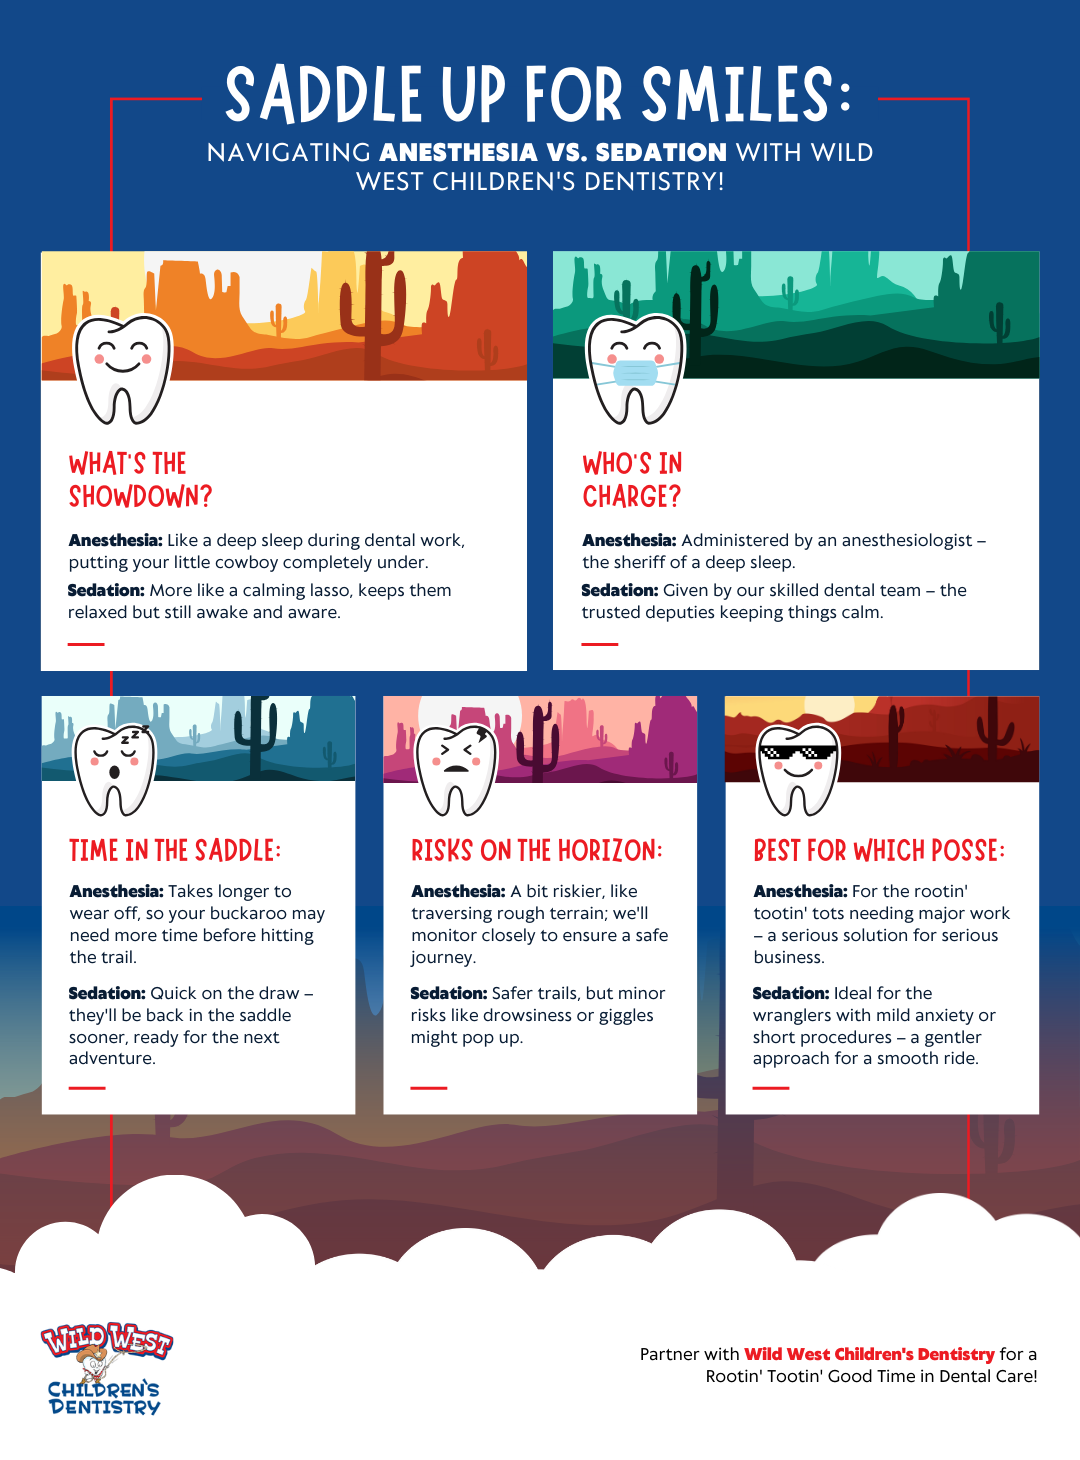 M42459 - Wild West Children's Dentistry - Infographic - Saddle Up for Smiles Navigating Anesthesia vs. Sedation With Wild West Children's Dentistry!.png